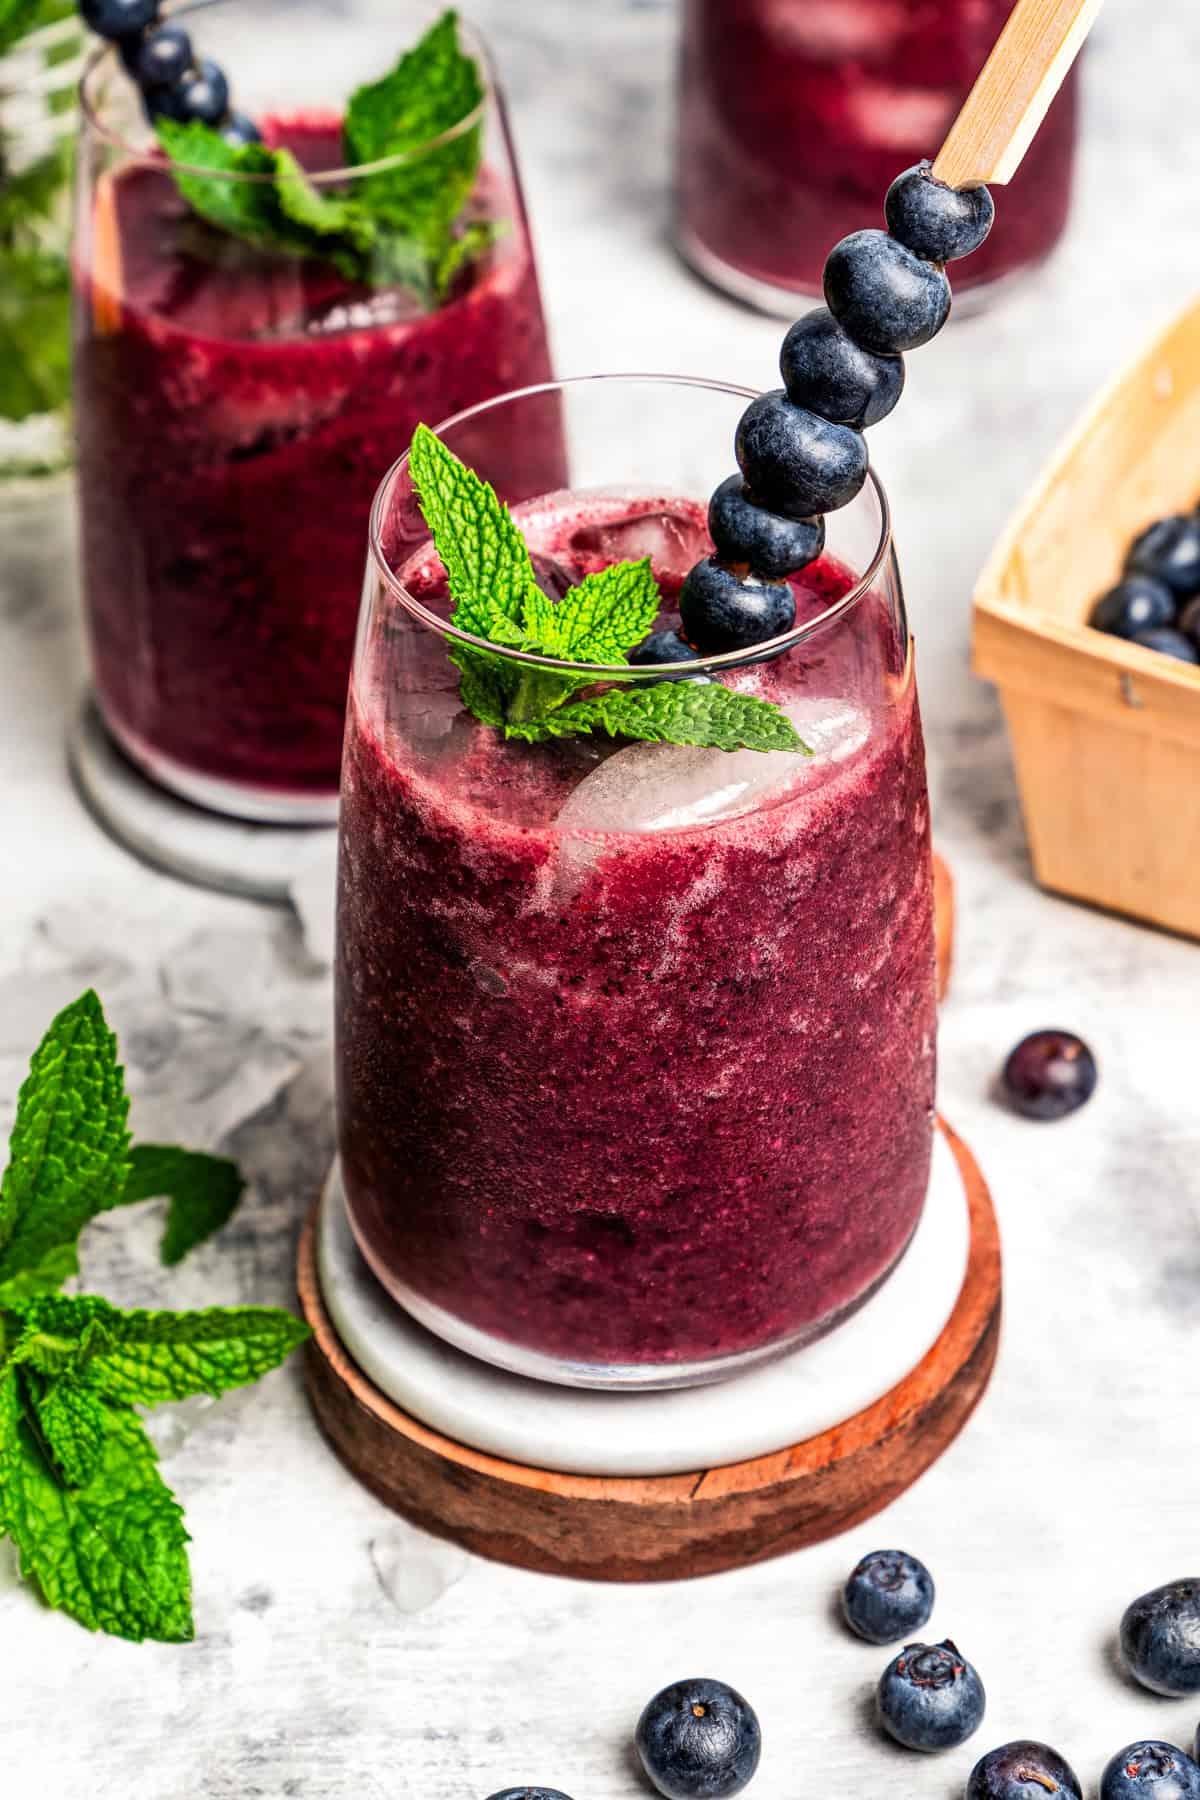 A glass of blueberry agua fresca garnished with fresh blueberries and mint is set on a wooden coaster, with two more glasses in the background.